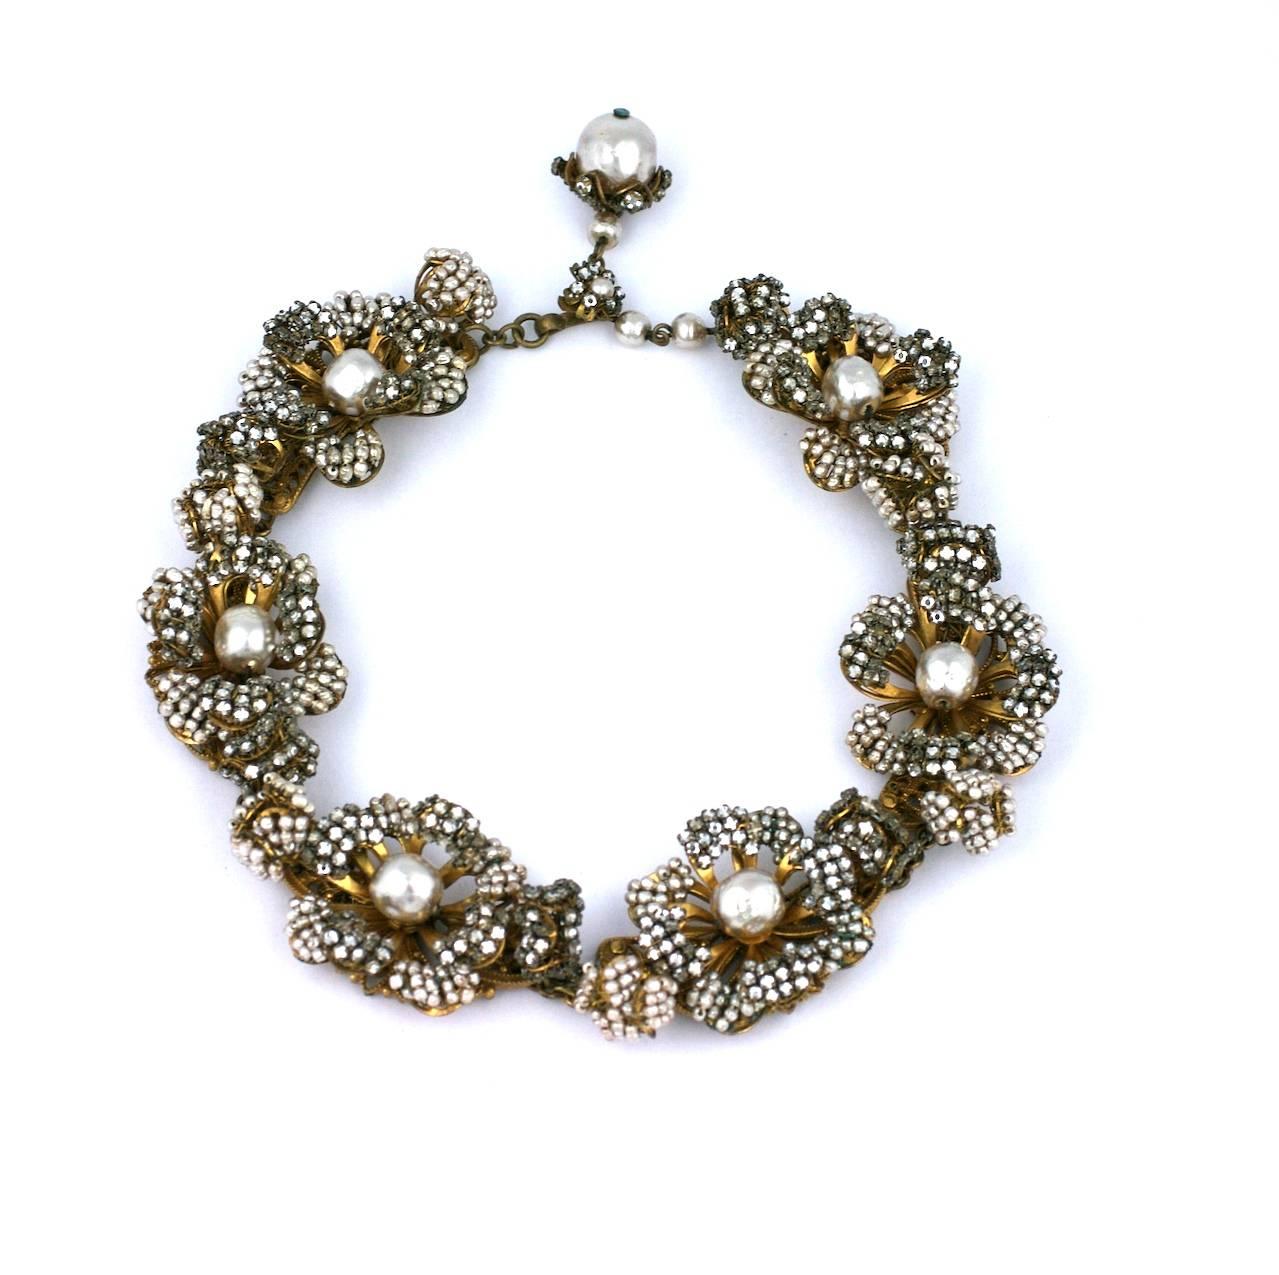 Collector quality Miriam Haskell Massive Rose Monte and Faux Pearl Flower Collar. 
The 3 dimensional flowerheads are completely hand embroidered with rose monte crystals and tiny faux pearl beads. Each flower has a closed bud on each side, one